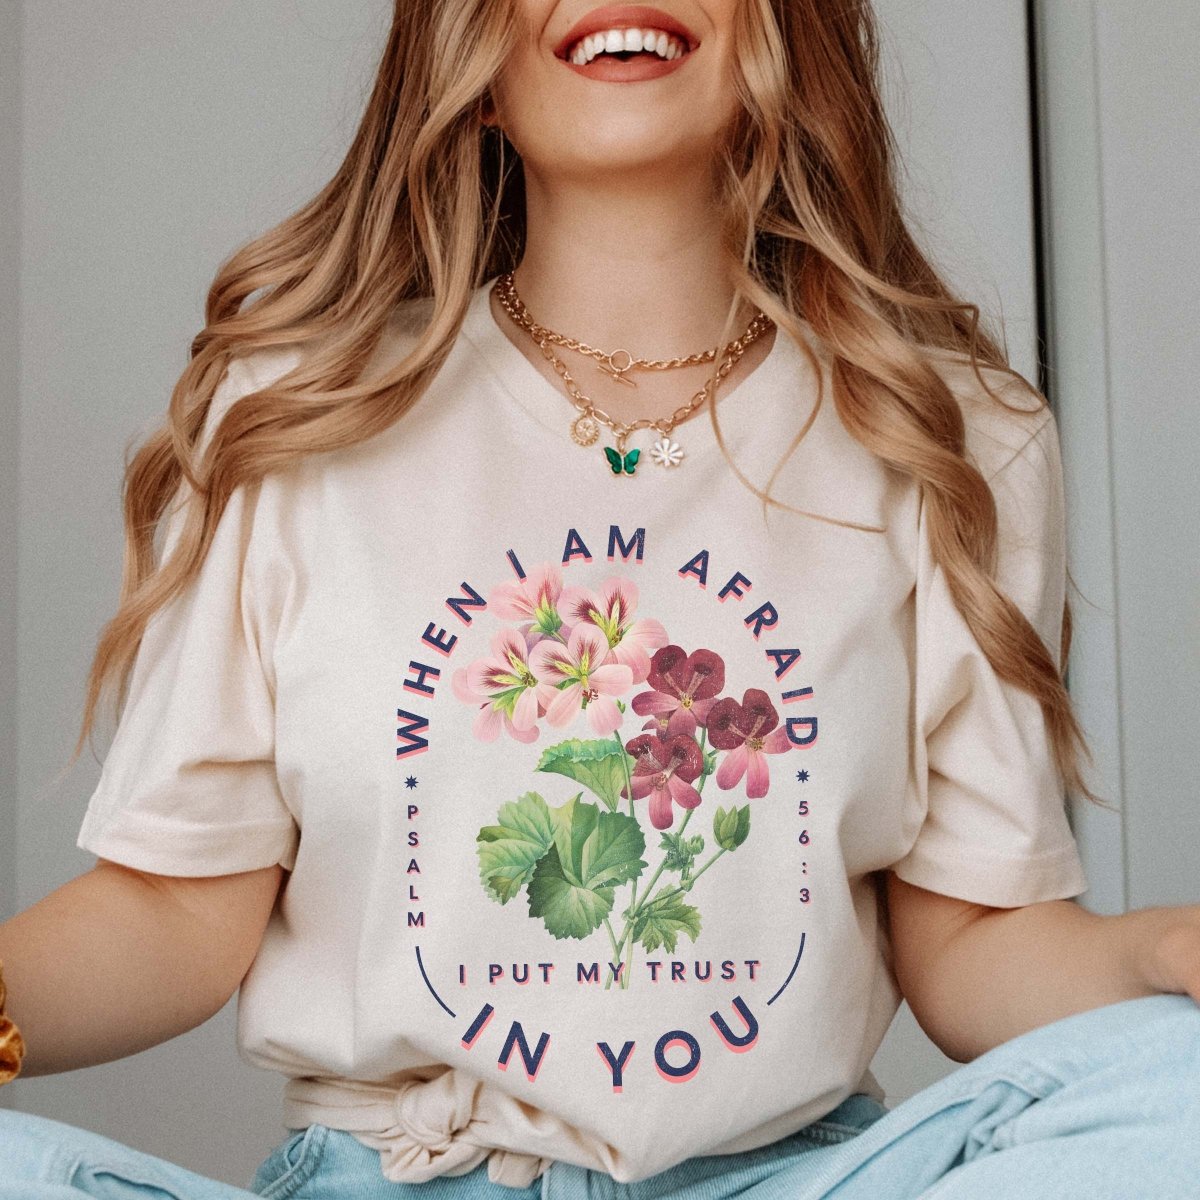 I Put My Trust In You Tee - Limeberry Designs